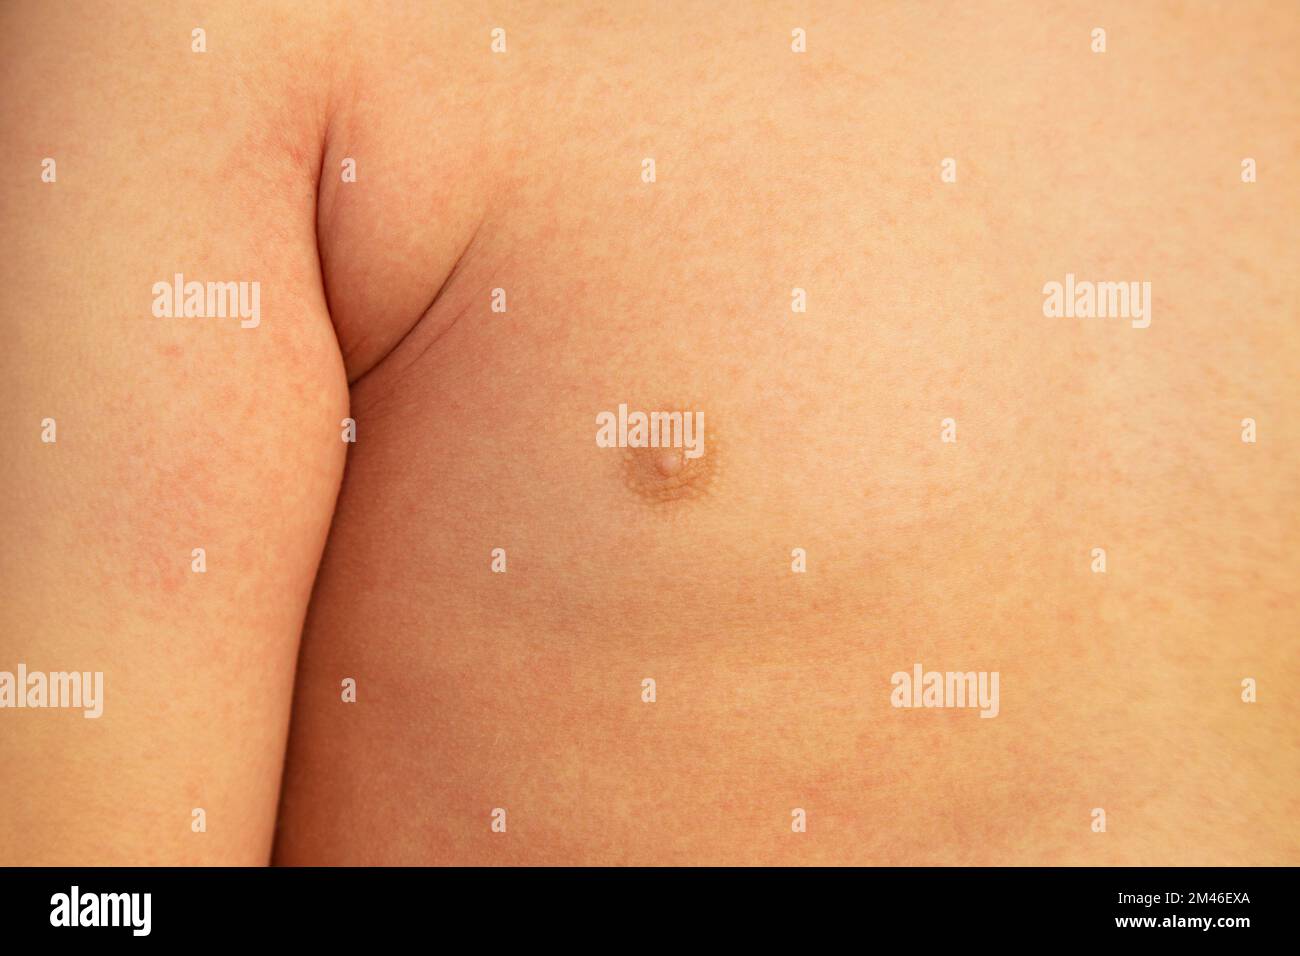 Rash on the chest of a small child with scarlet fever caused by group A streptococcus Stock Photo